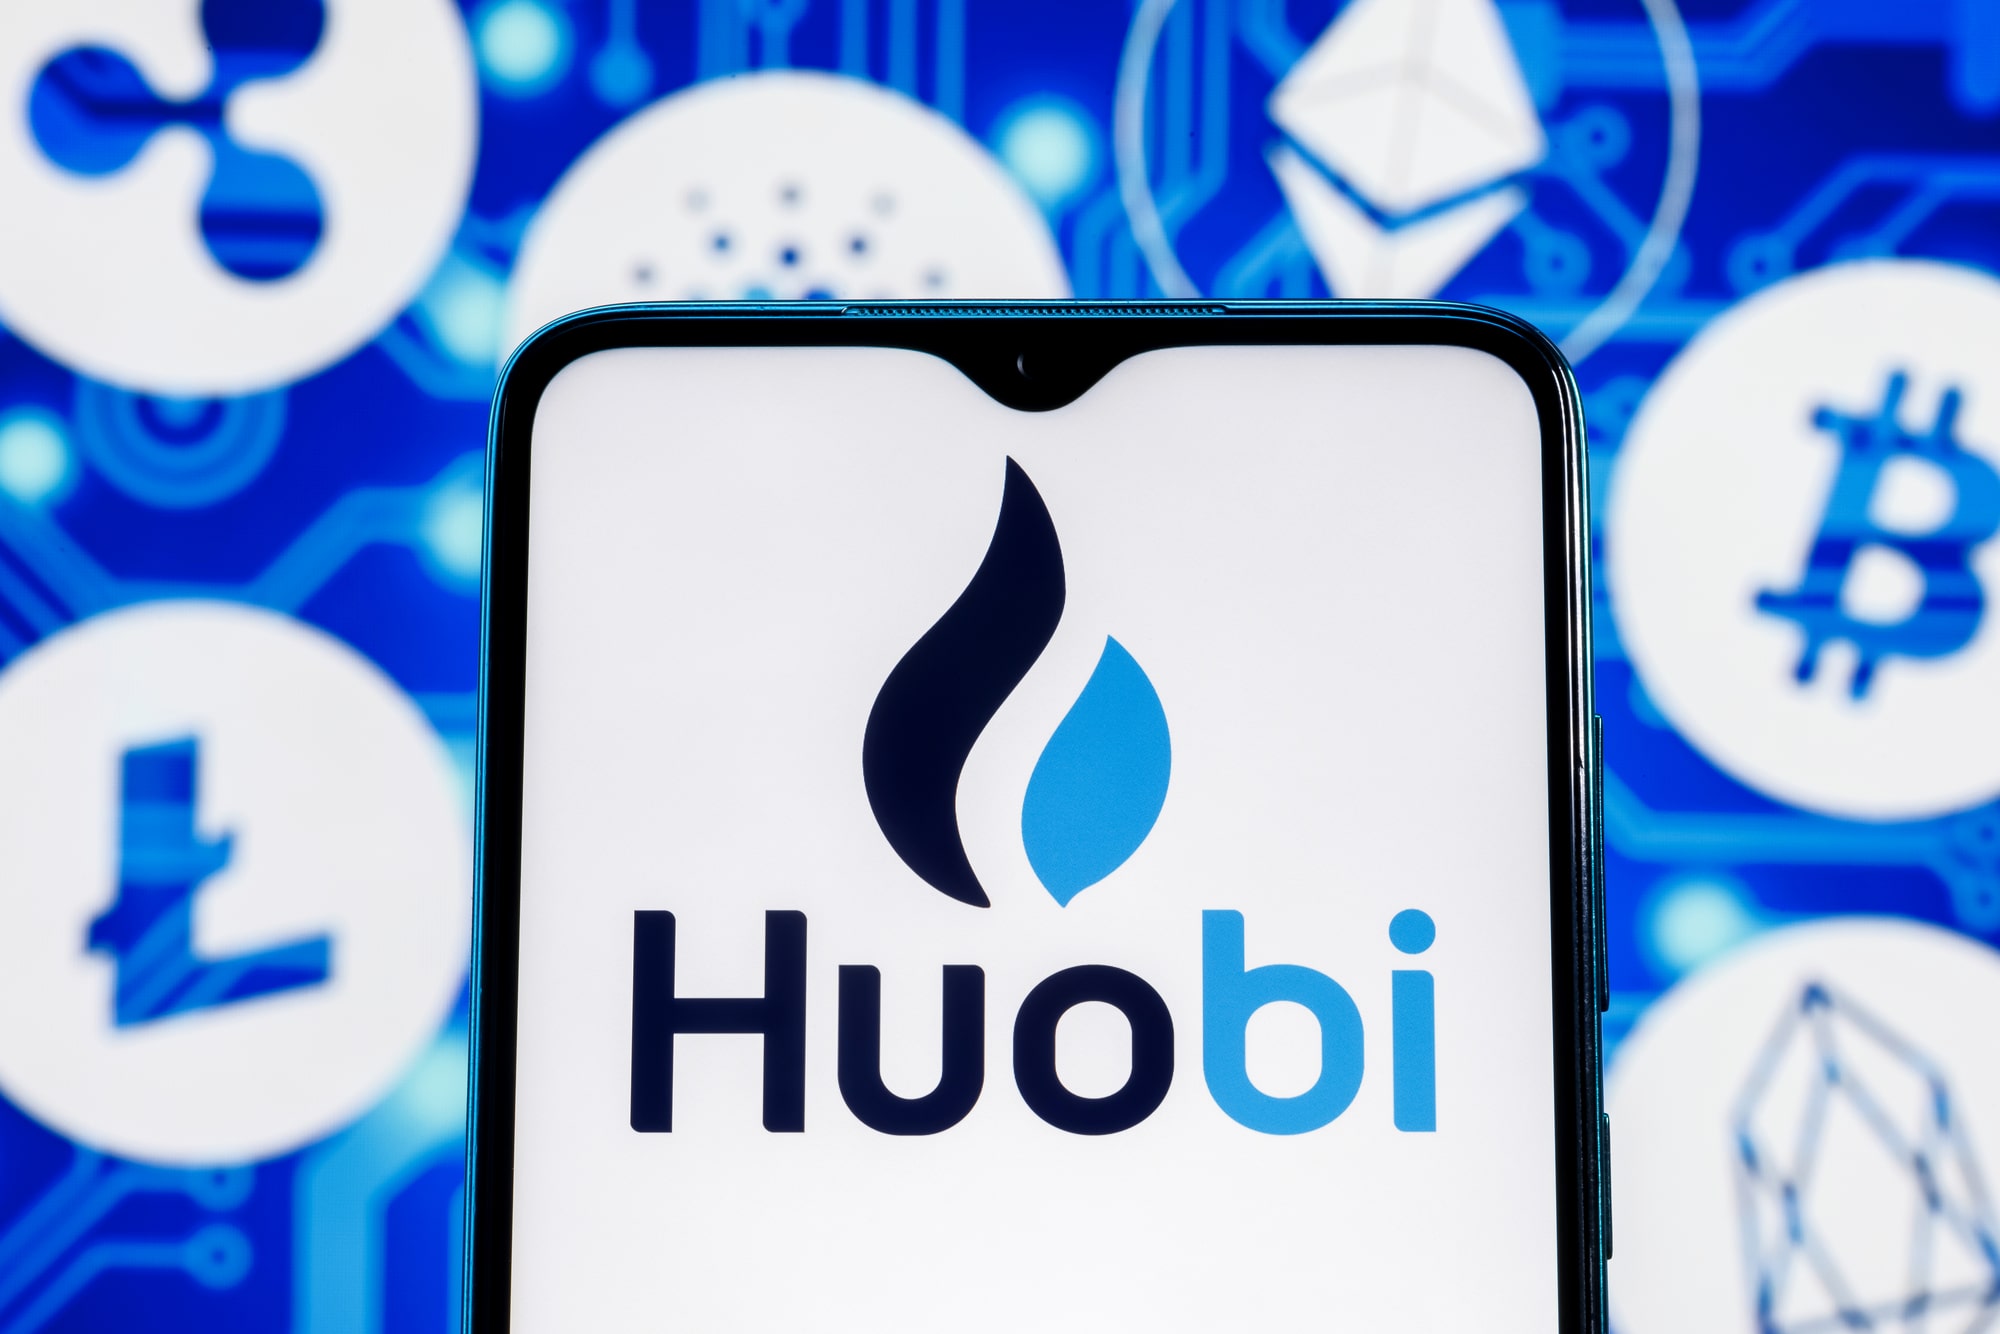 Huobi launches its NFT marketplace and Primelist event for Investors